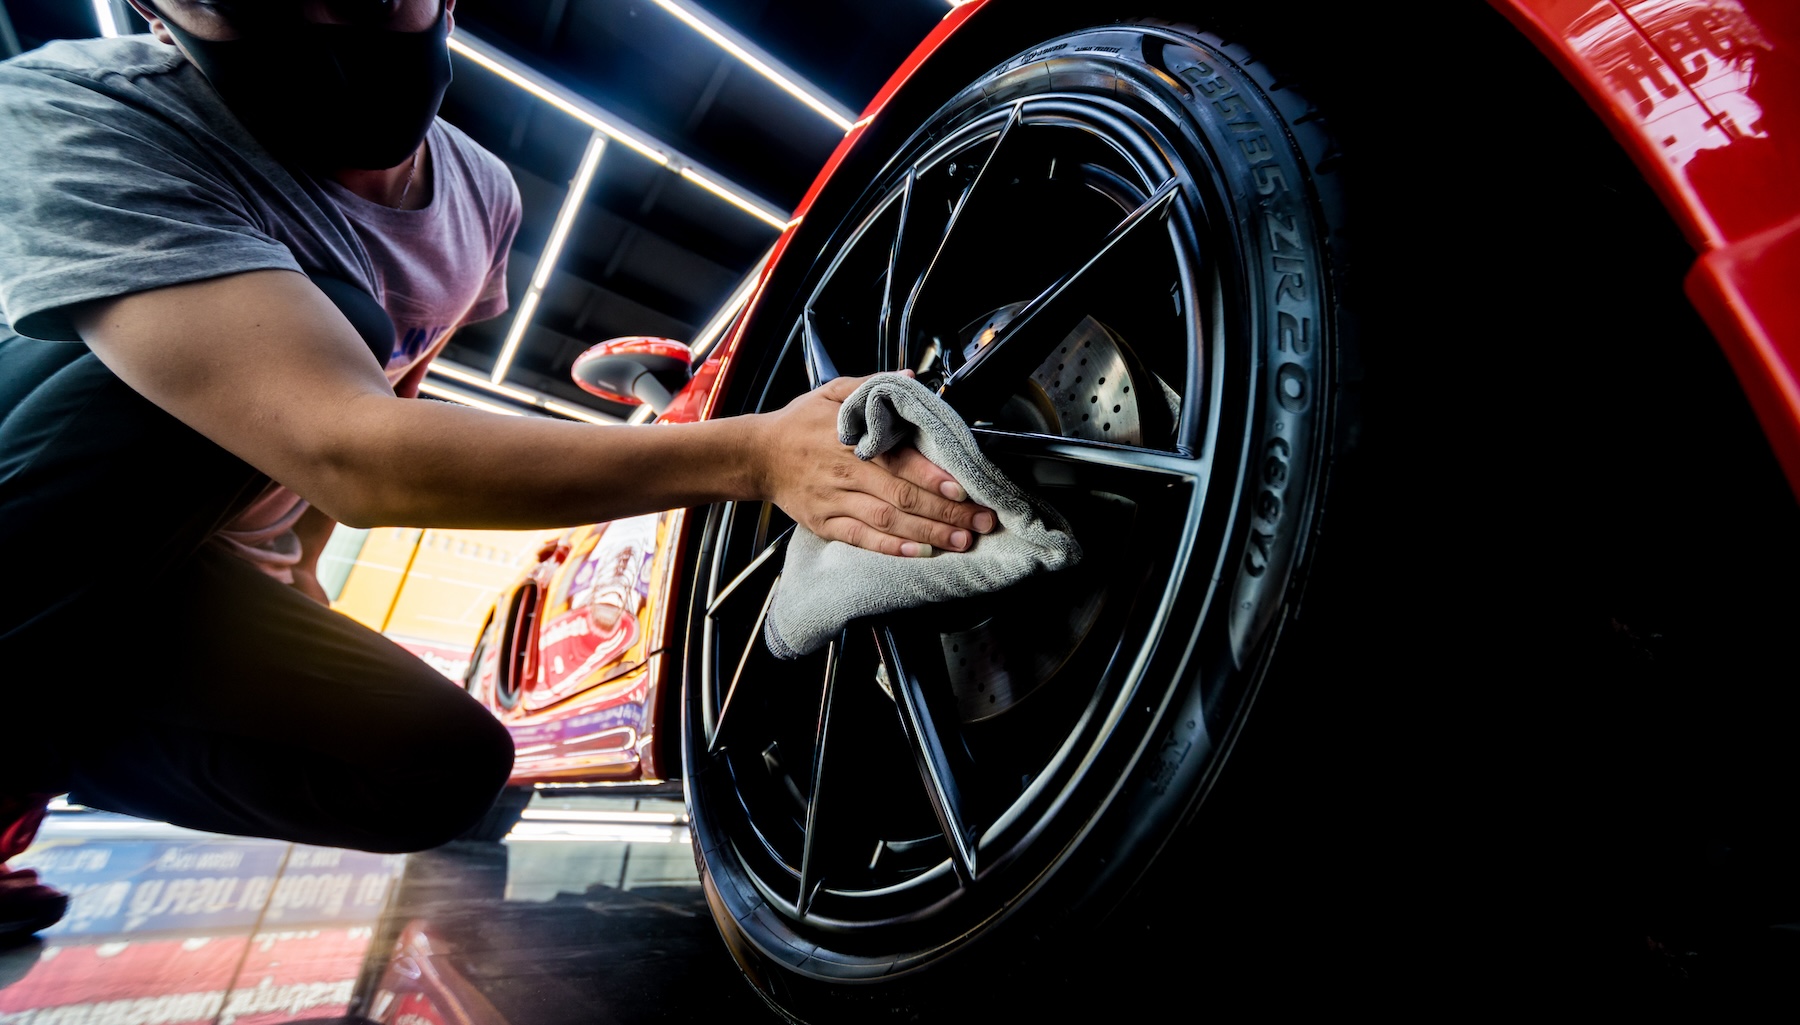 Ceramic Coating on Wheels: 3 Reasons to Protect Your Car's Wheels with Opti- Coat Pro